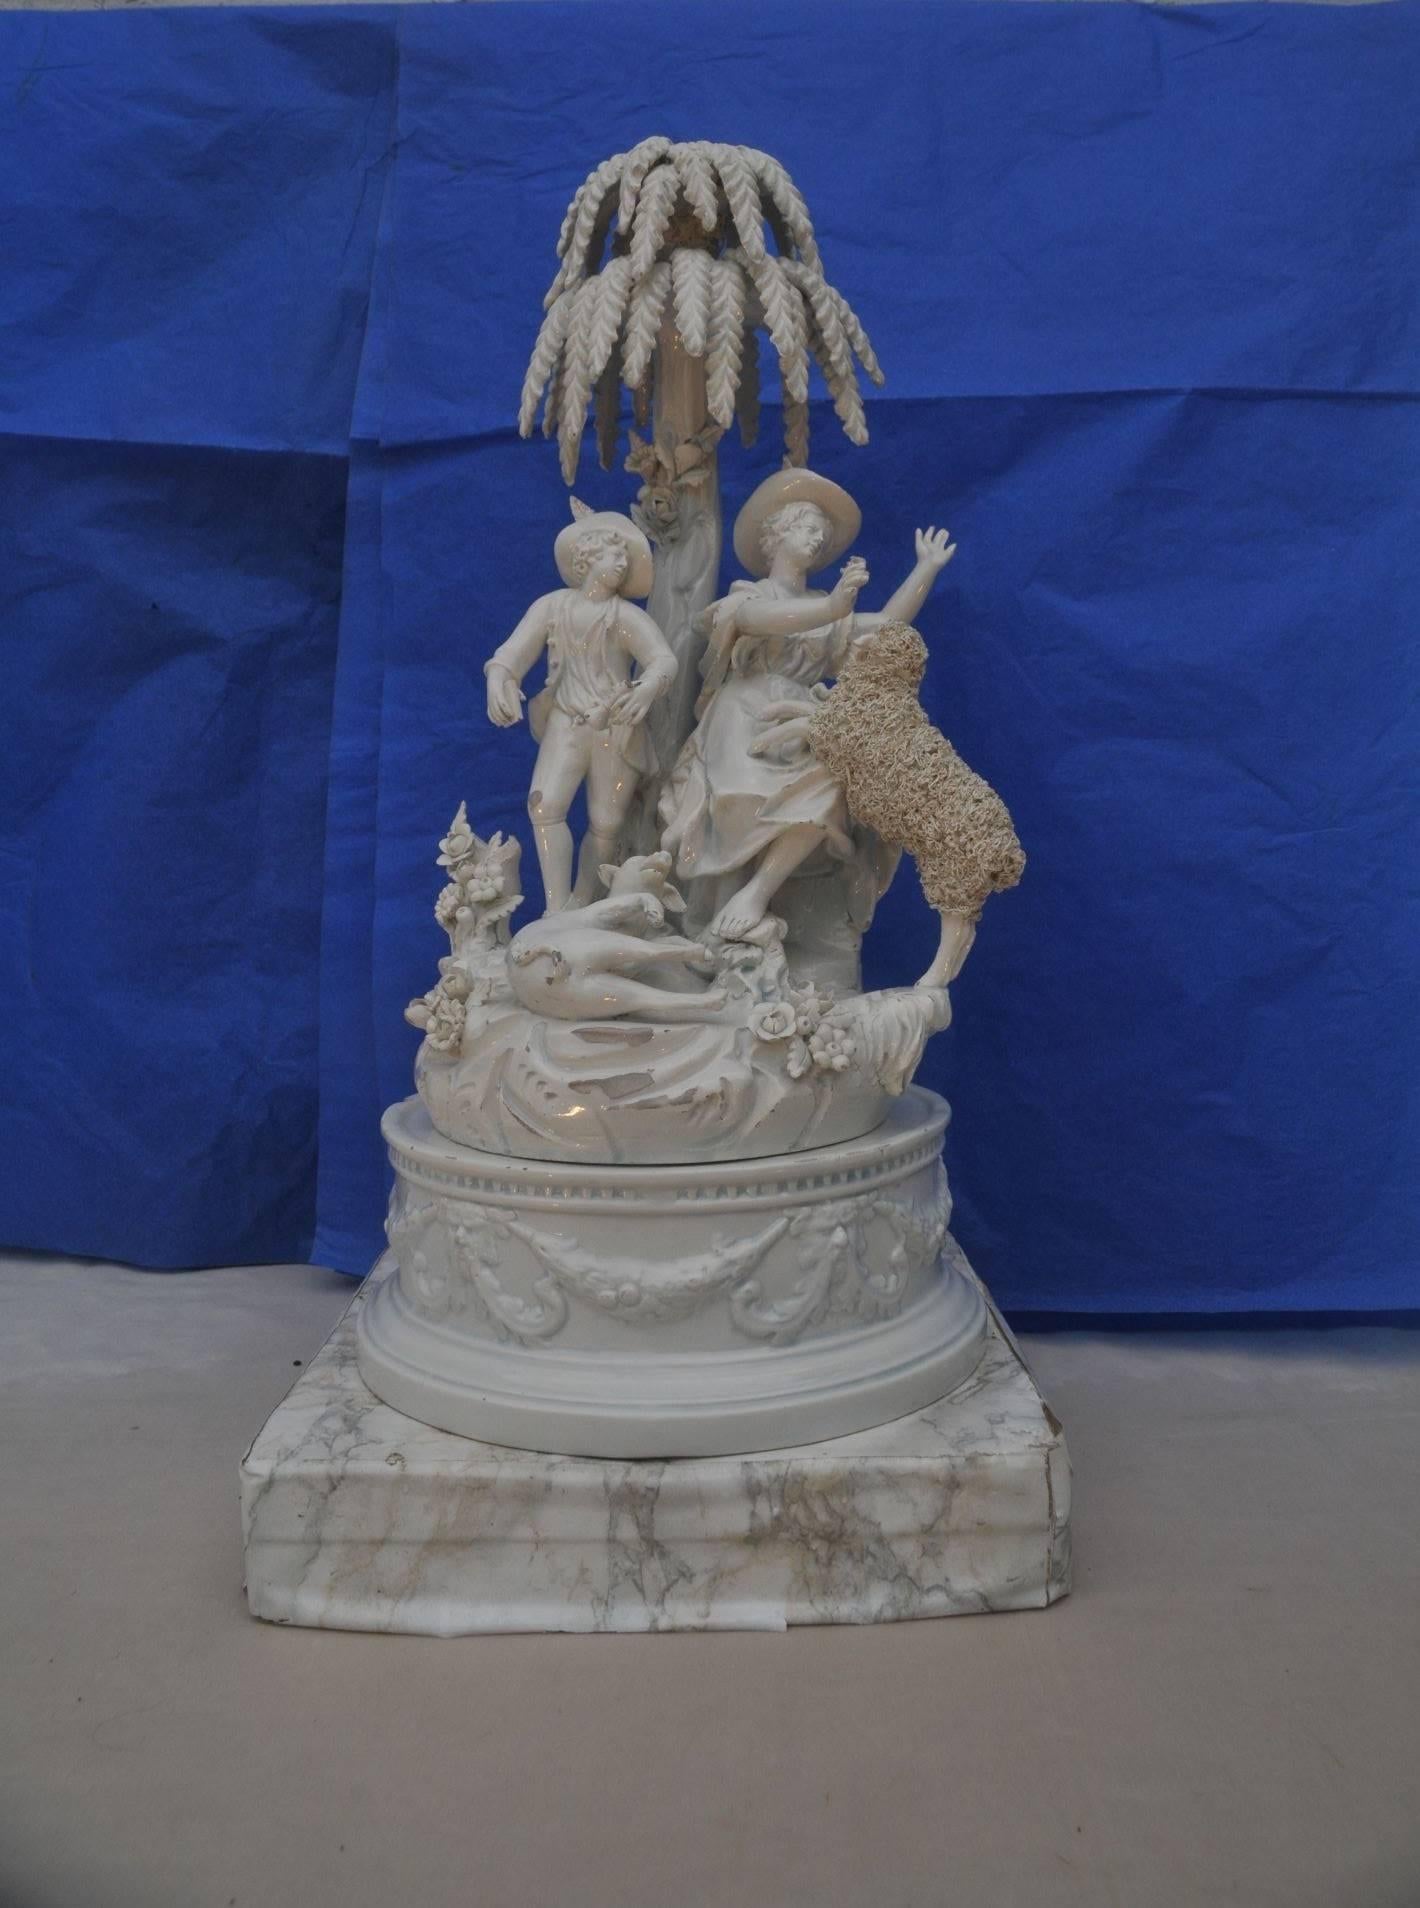 18th century.
Figuring a shepherd and a girl sitting on a rock work with a dog and a sheep under a tree.
Typical scene inspired by Marie Antoinette Louis XVI style.
Set on circular porcelain pedestal base.
Measures: H 15.60 inches (40